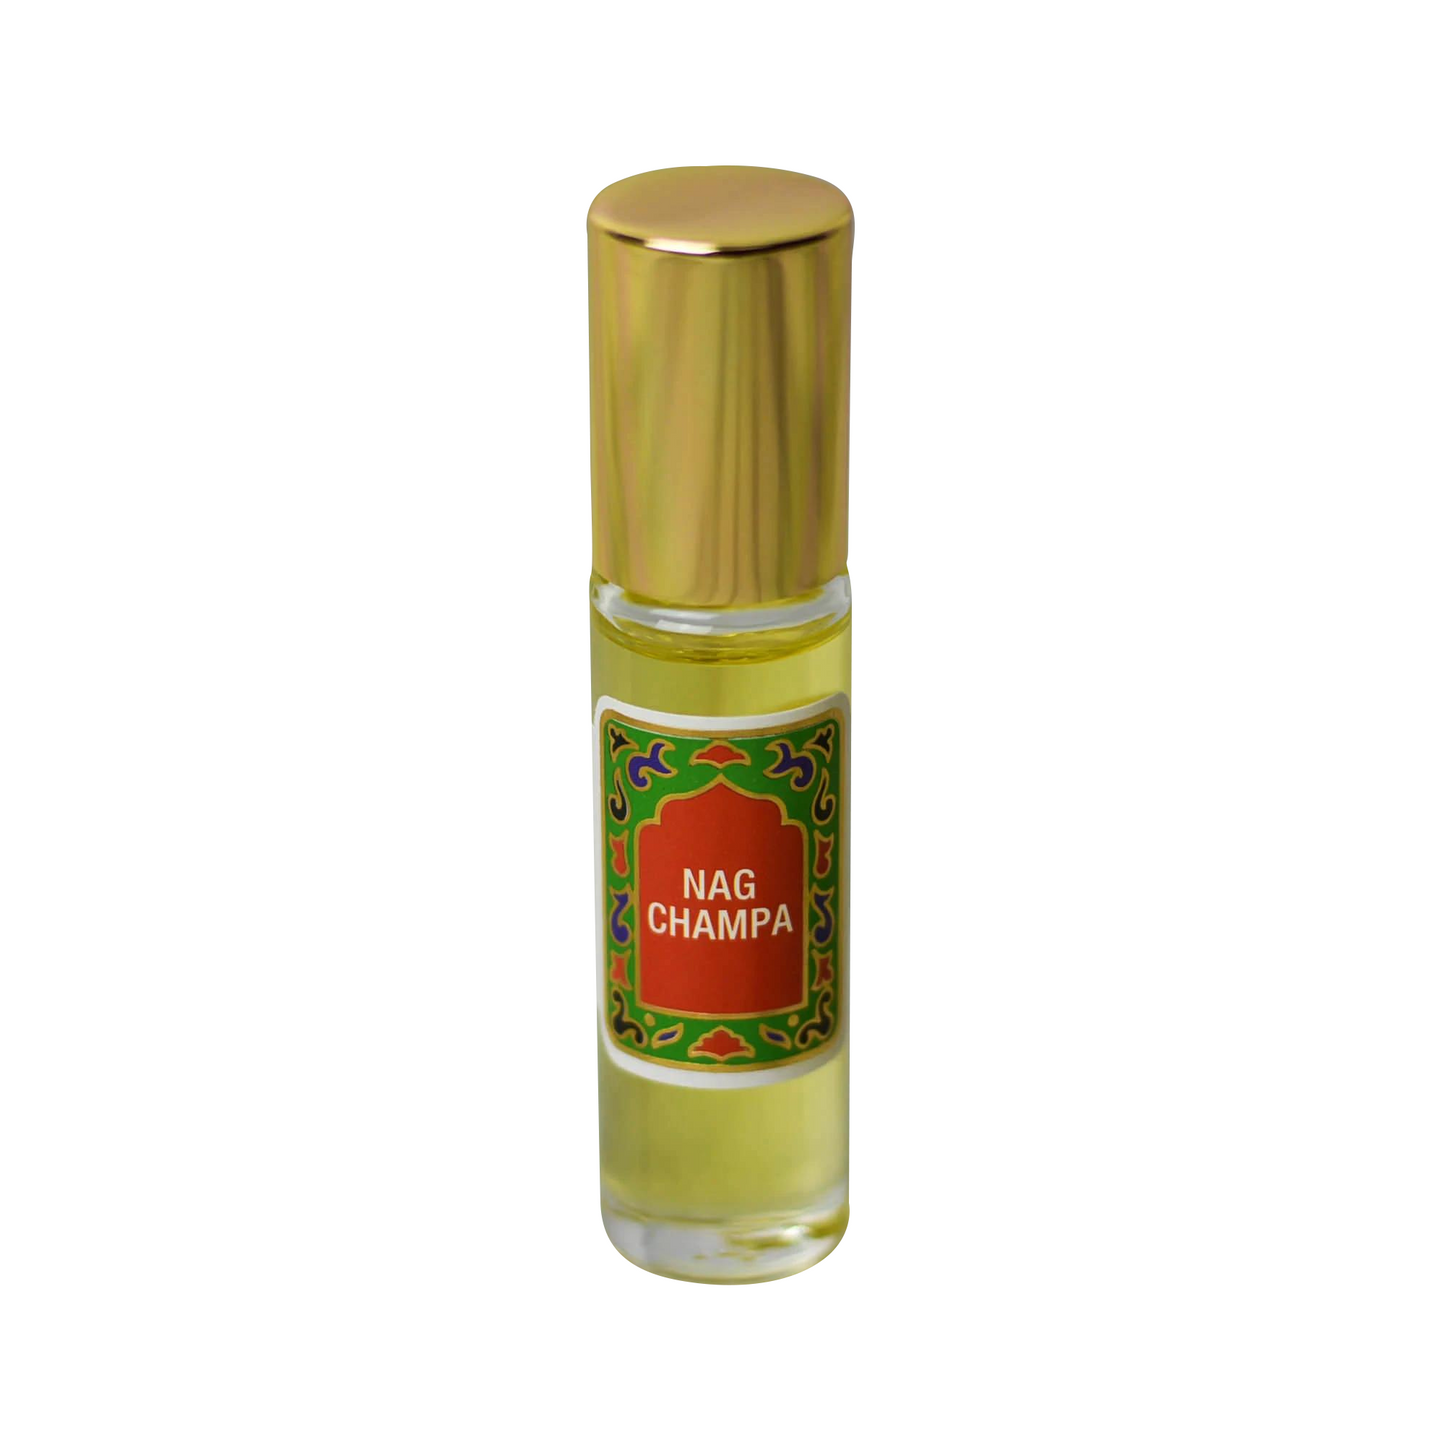 Primary image of Nag Champa Fragrance Roll-On